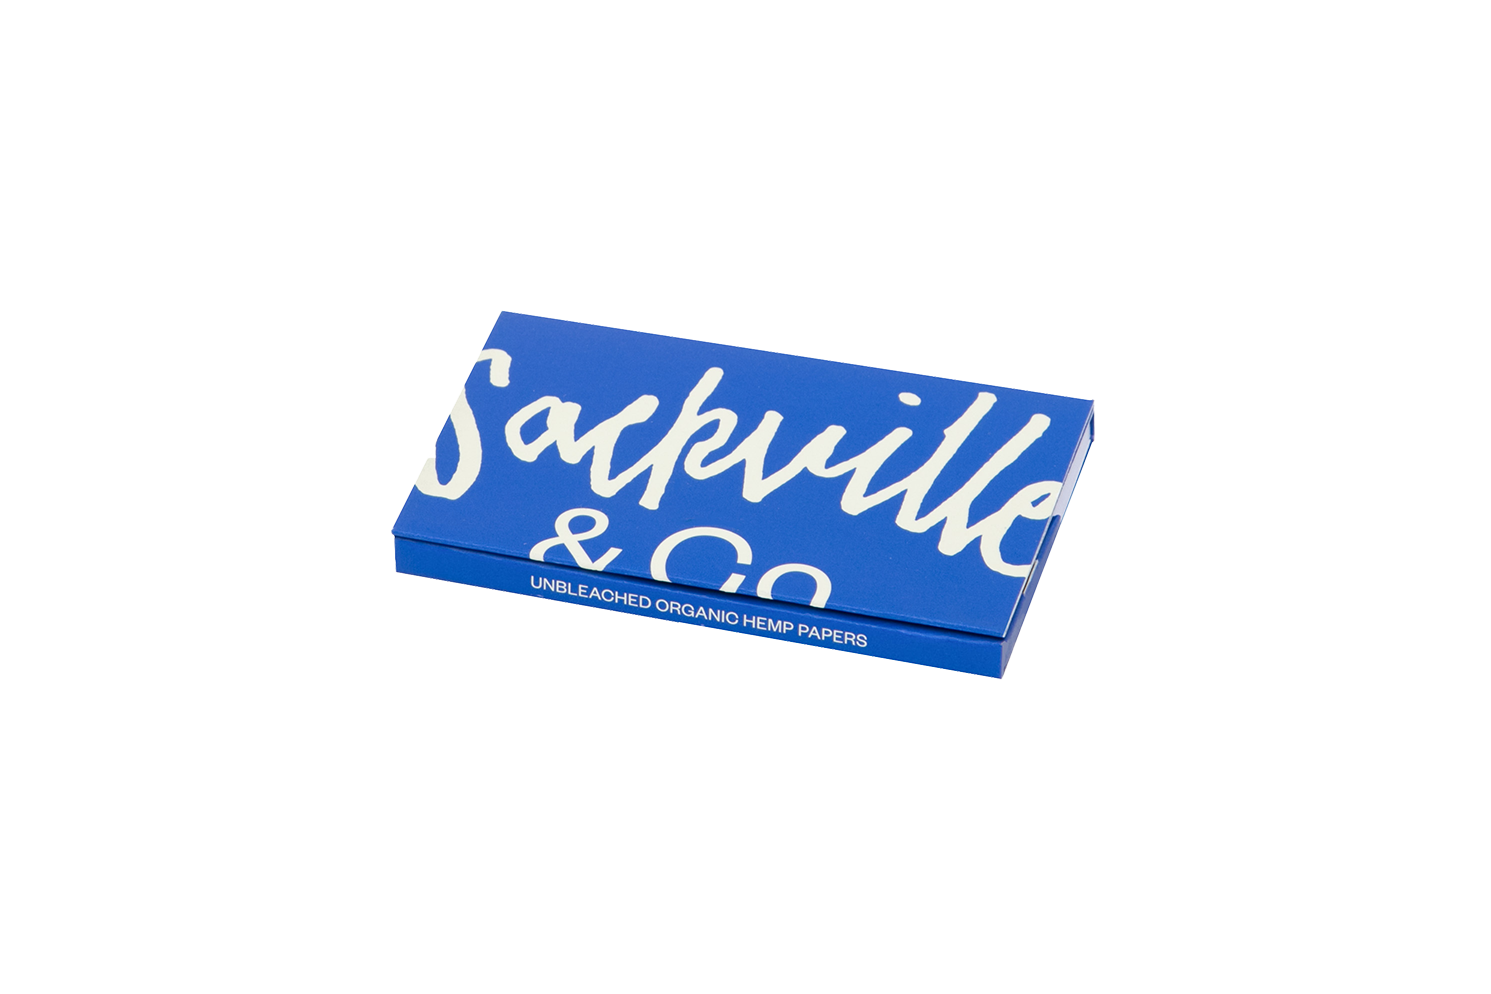 BLUE ROLLING PAPERS - Sackville & Co.